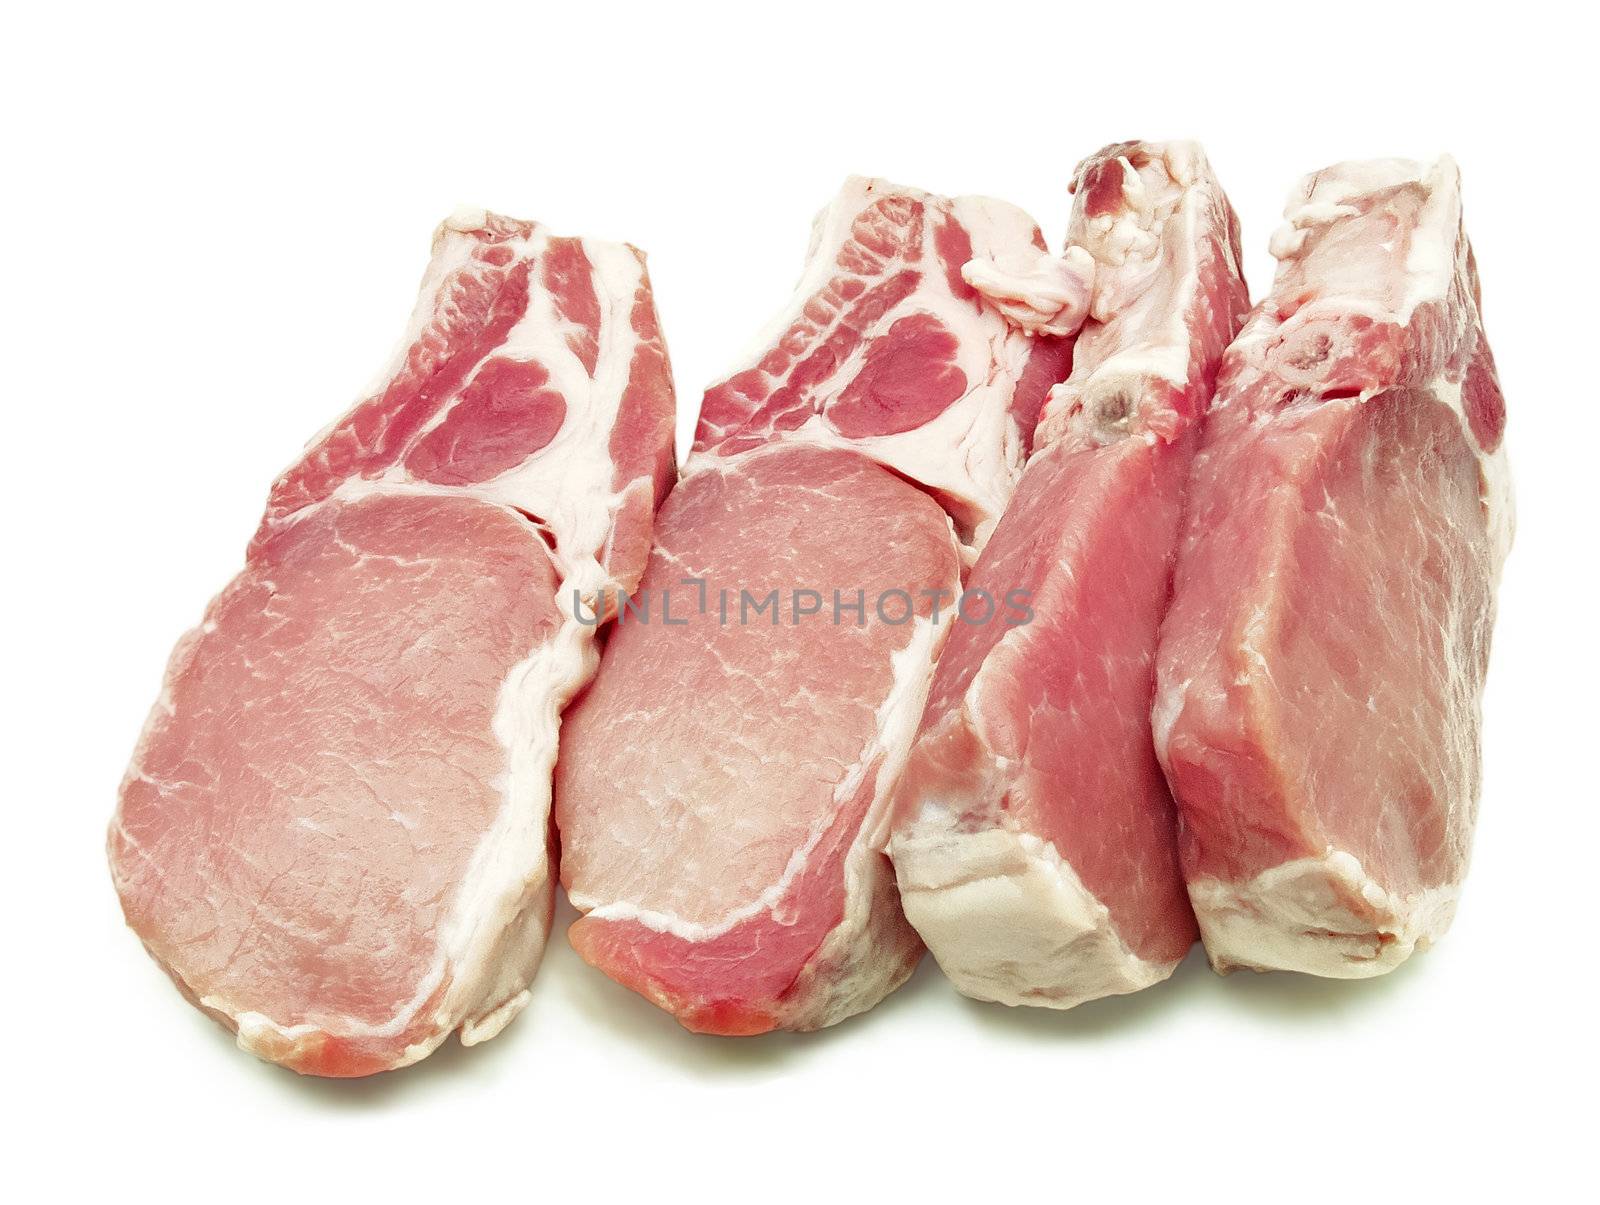 Some pork chops on a white background